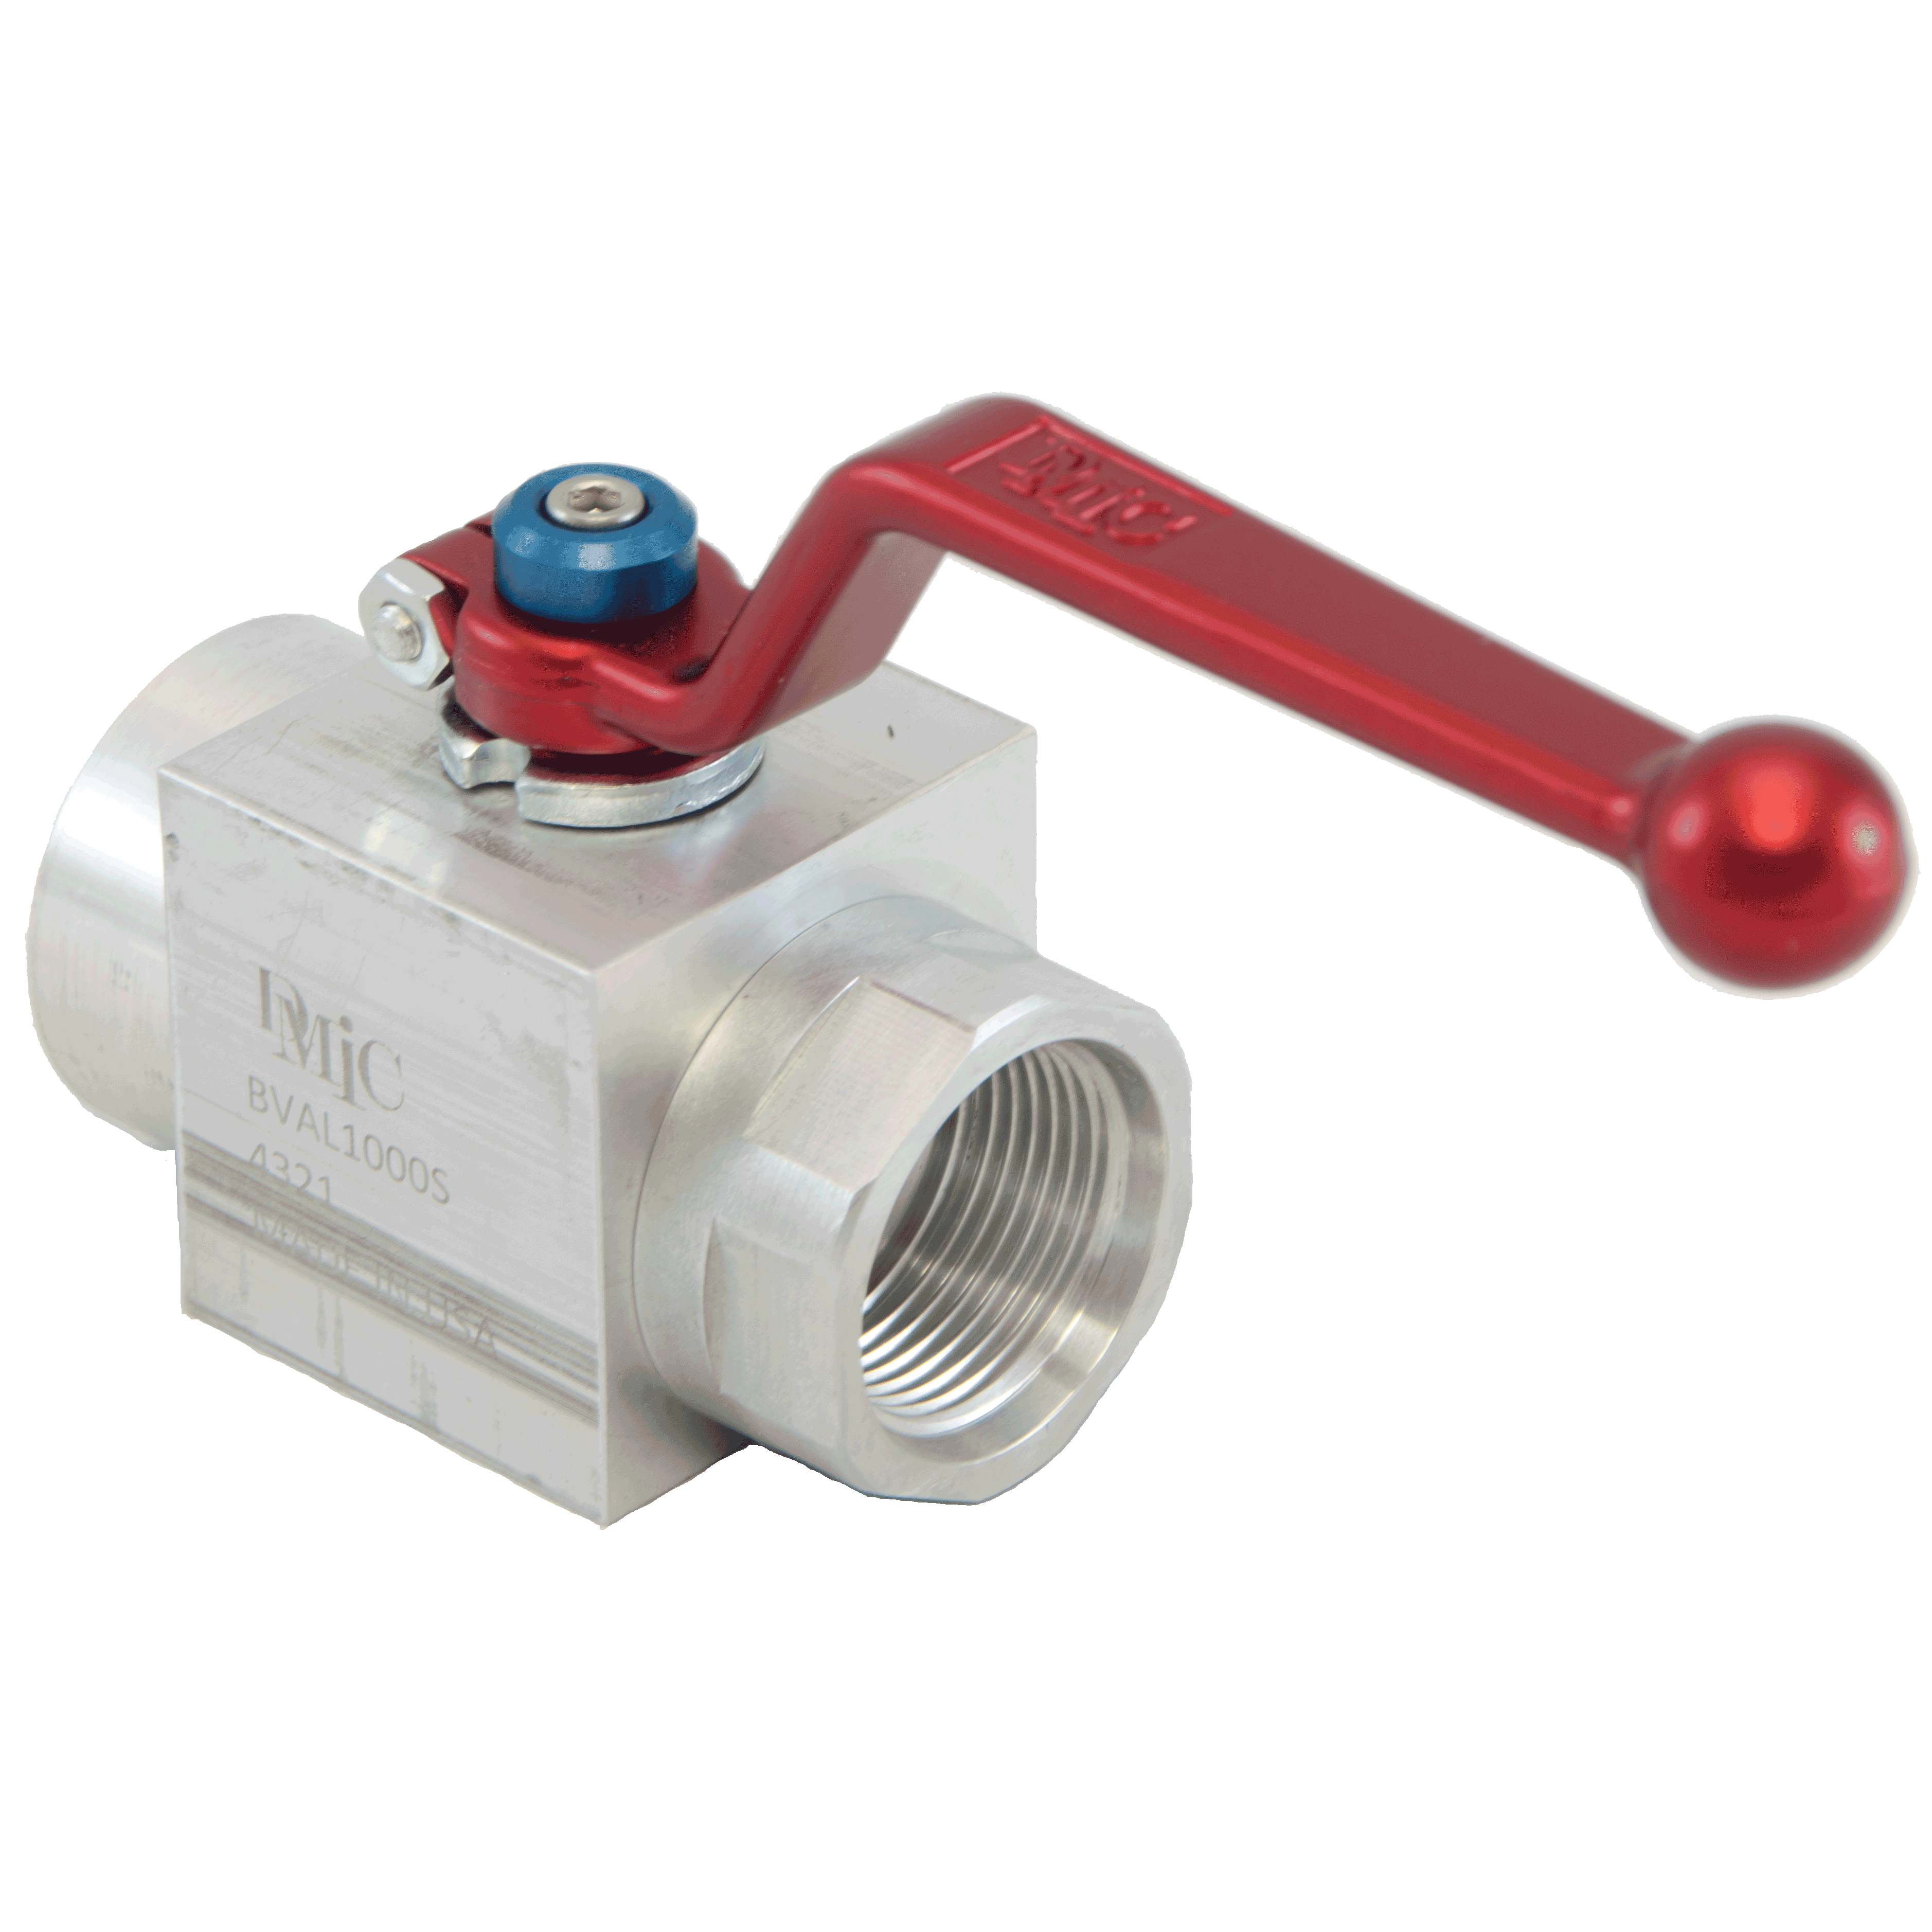 BVAL-2500N-4321-AZZN : DMIC Suction Ball Valve, 2.5 NPT, Aluminum, 400psi, Two-Way, with Locking Handle